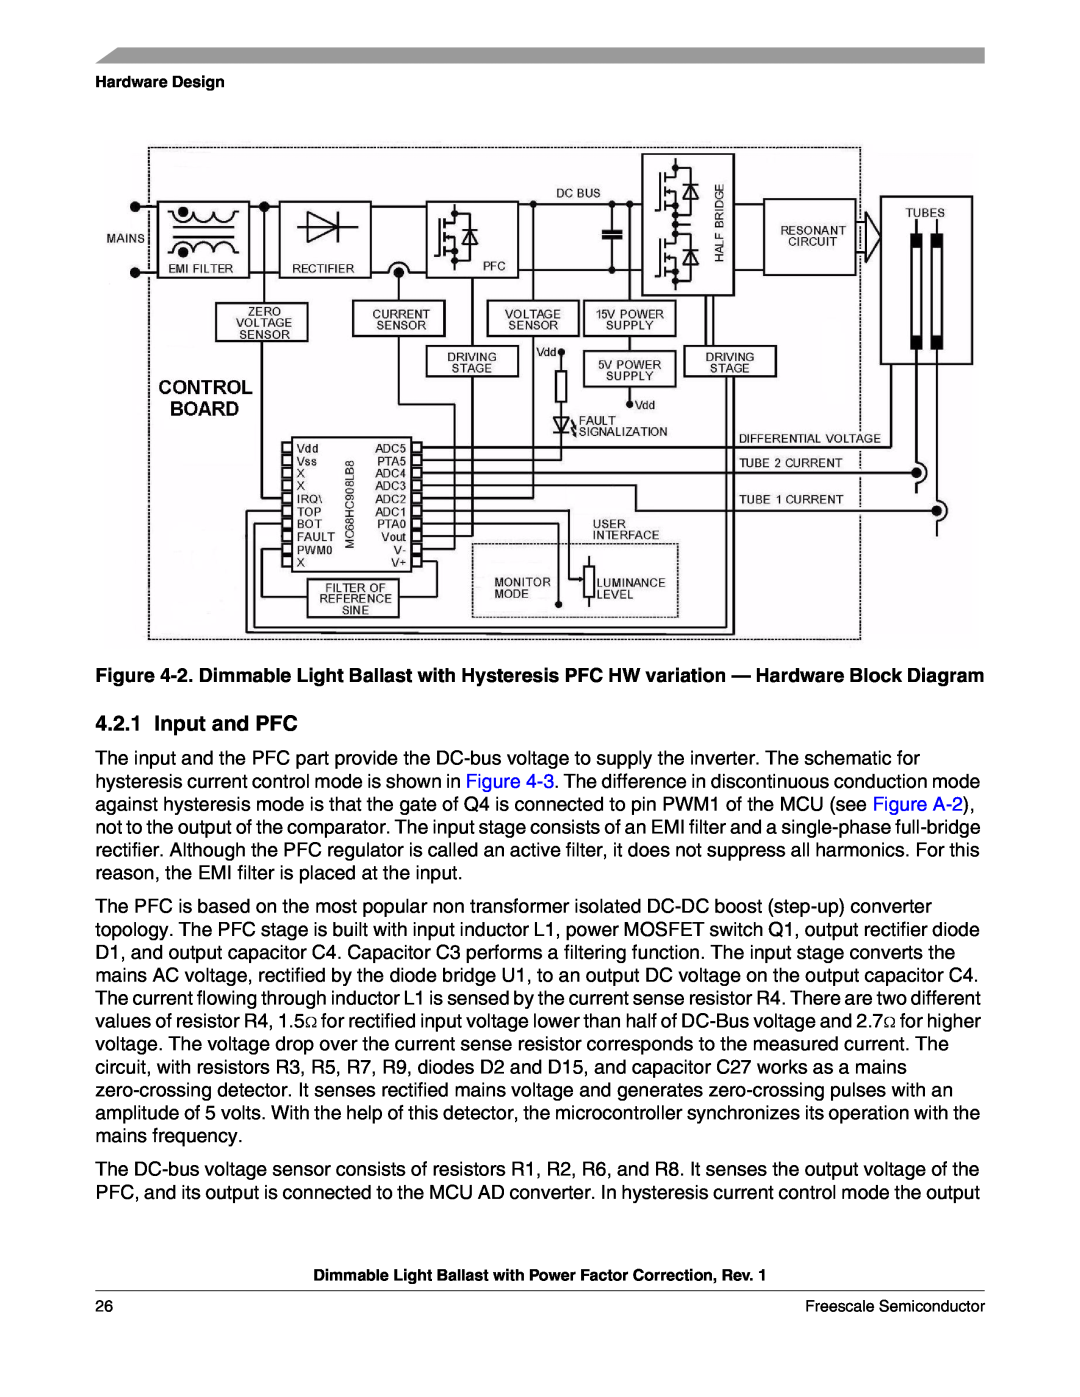 Freescale Semiconductor M68HC08 manual Input and PFC, Hardware Design 